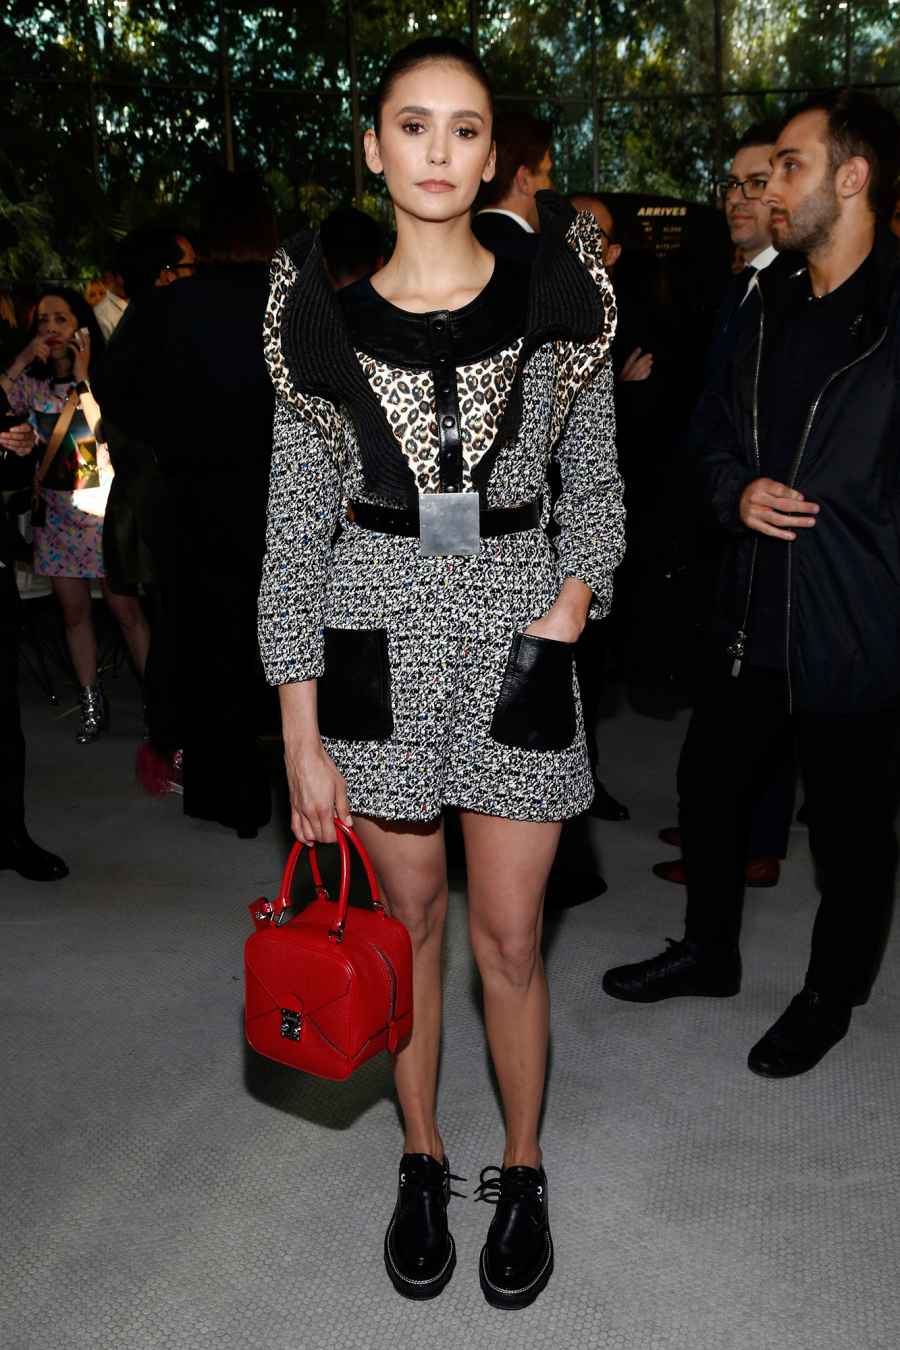 Stars at the Louis Vuitton Cruise Show